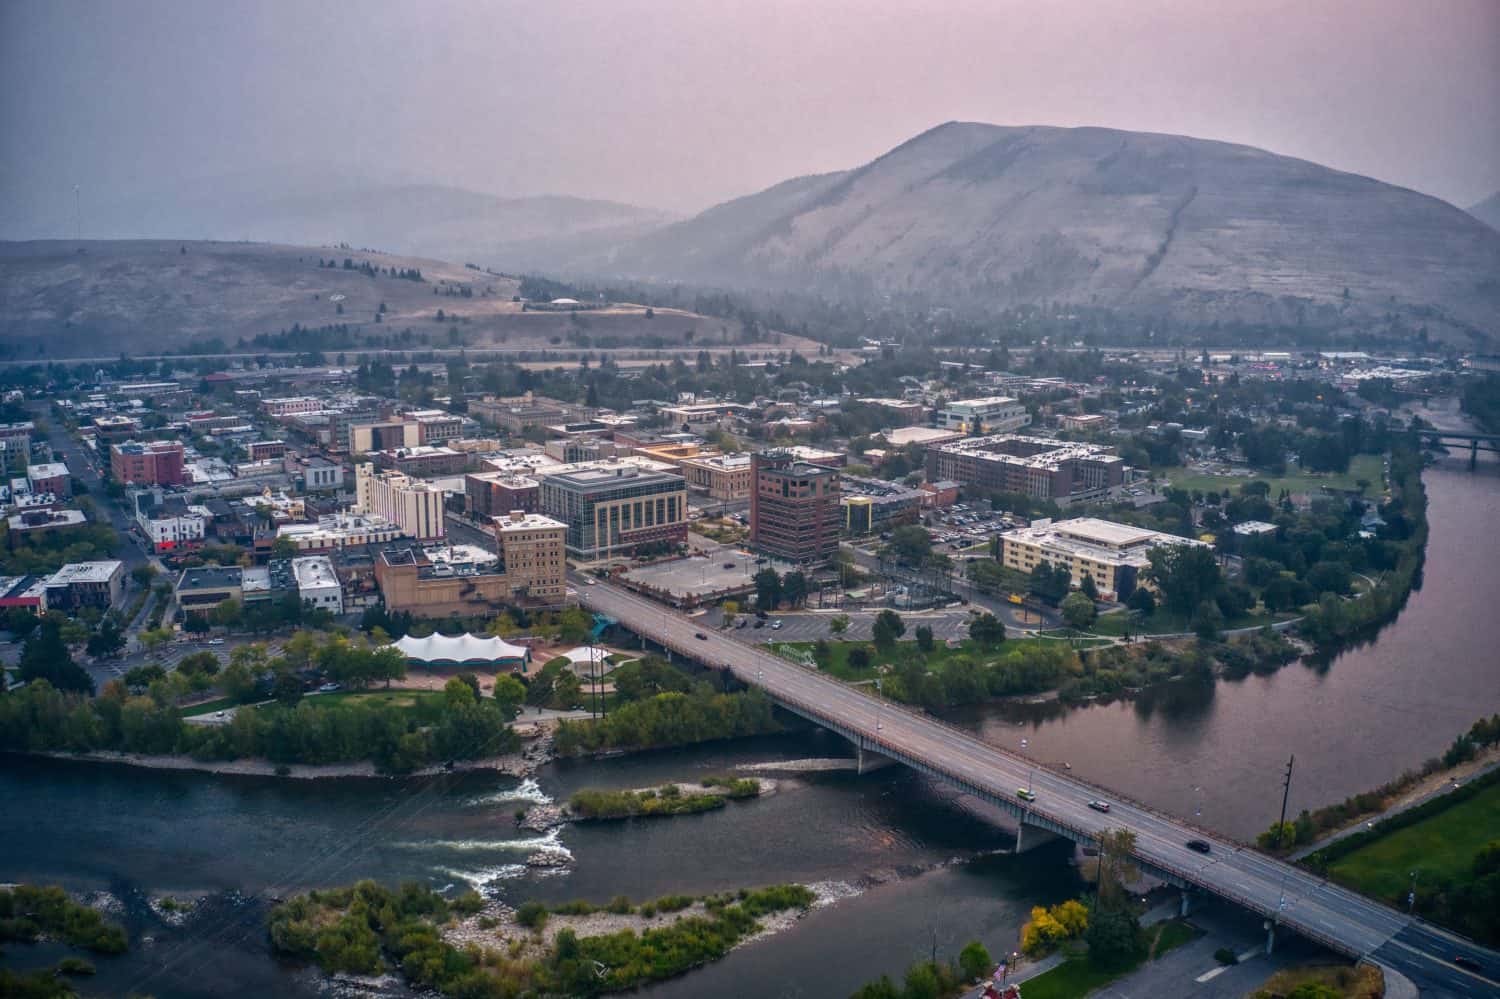 Aerial View of Missoula, Montana on a Hazy Morning